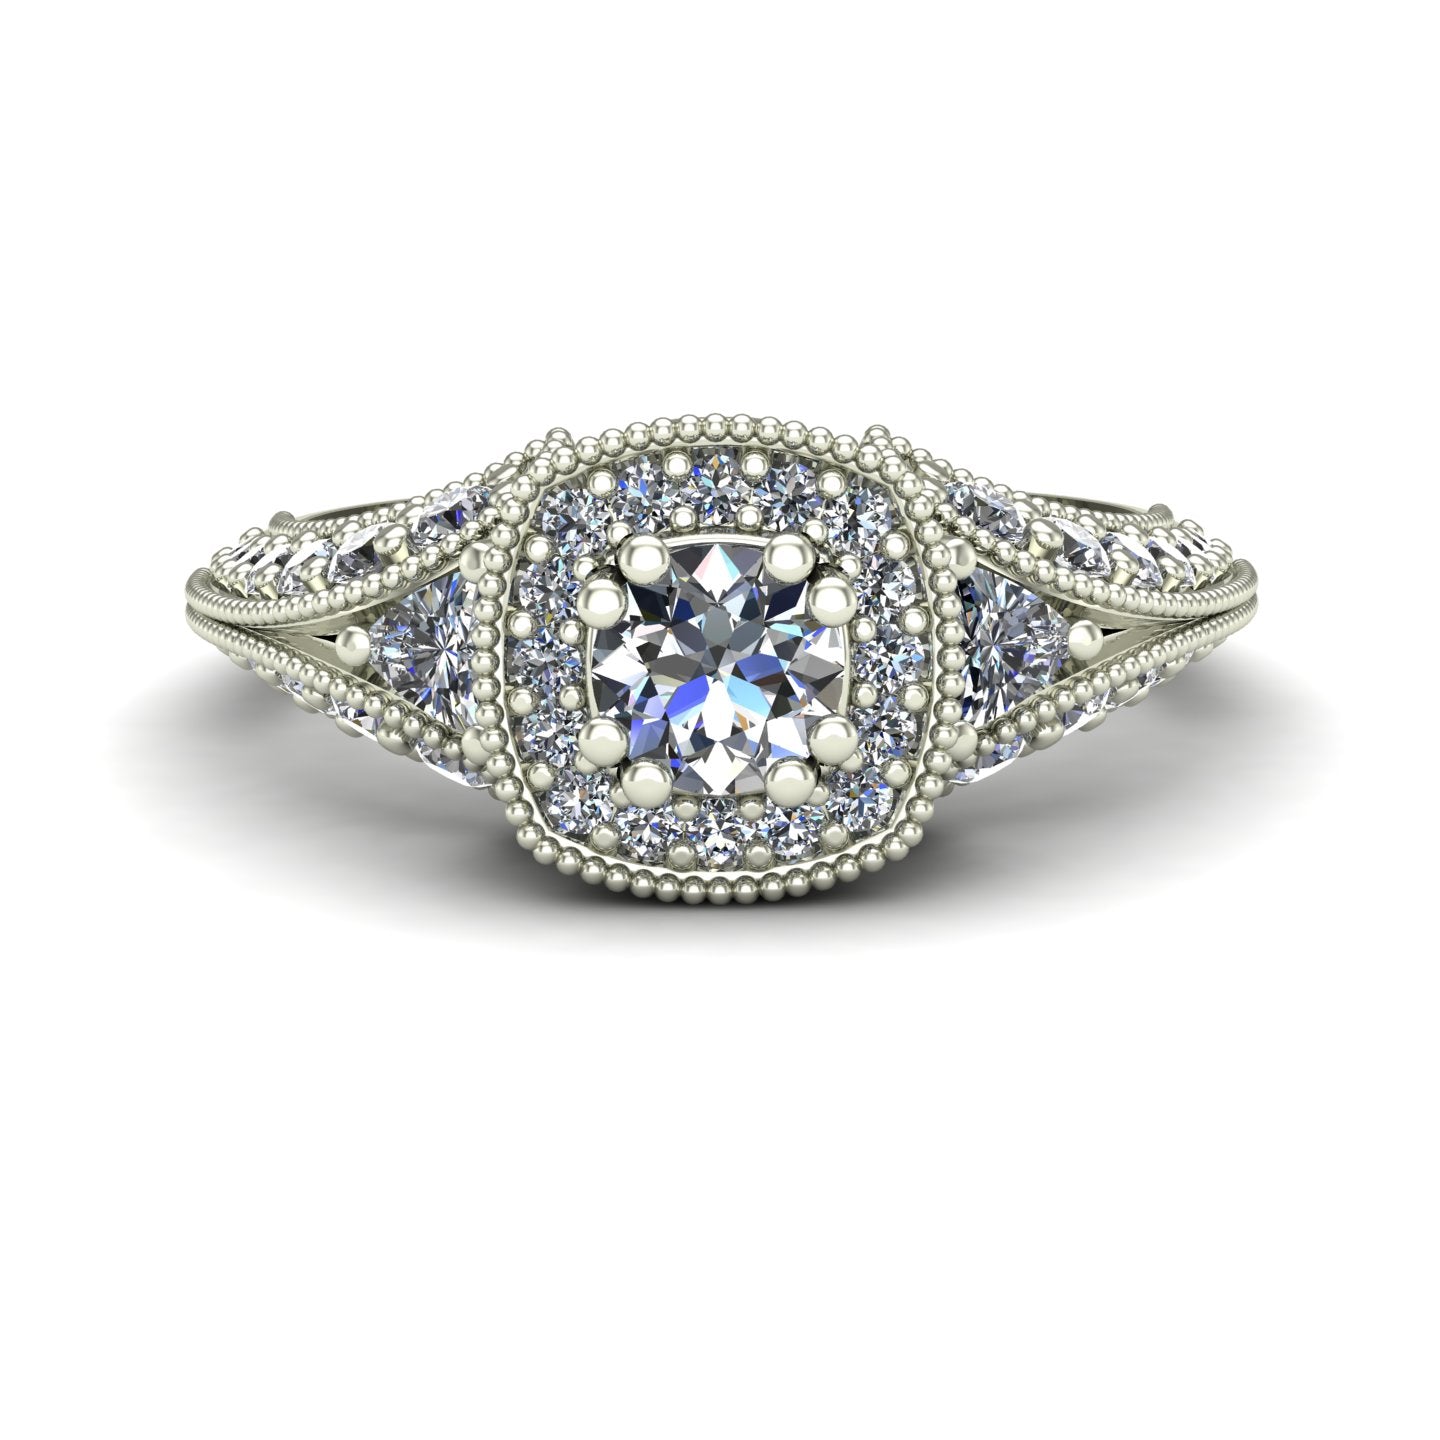 diamond halo engagement ring with trillions and split shank in 14k white gold - Charles Babb Designs - top view